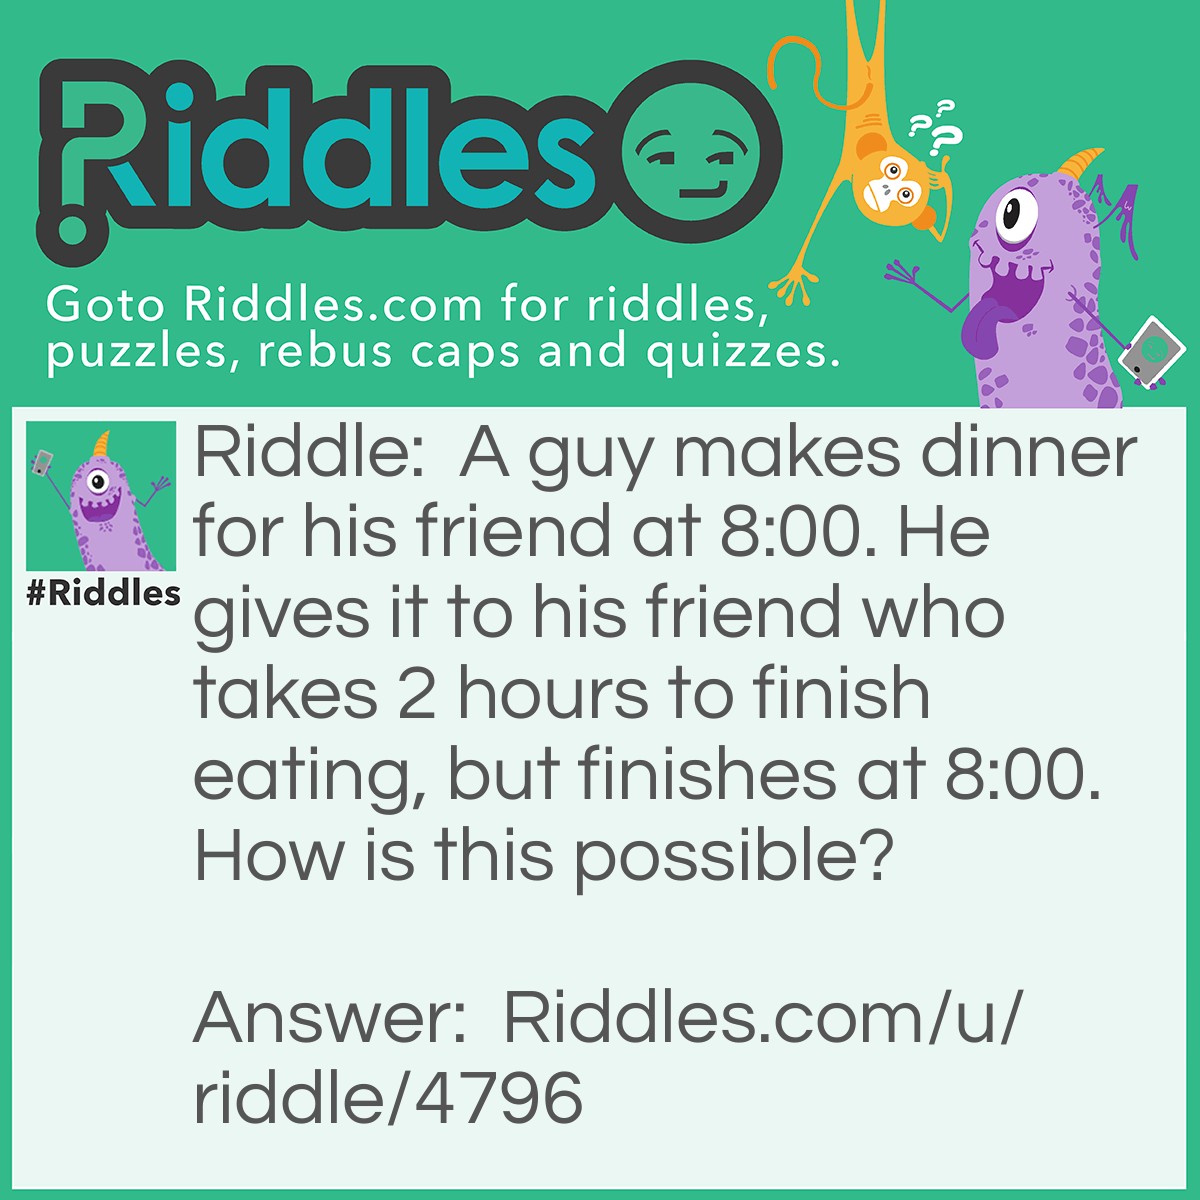 Riddle: A guy makes dinner for his friend at 8:00. He gives it to his friend who takes 2 hours to finish eating, but finishes at 8:00. How is this possible? Answer: The guys is a chef that works at a restaurant called 8:00.